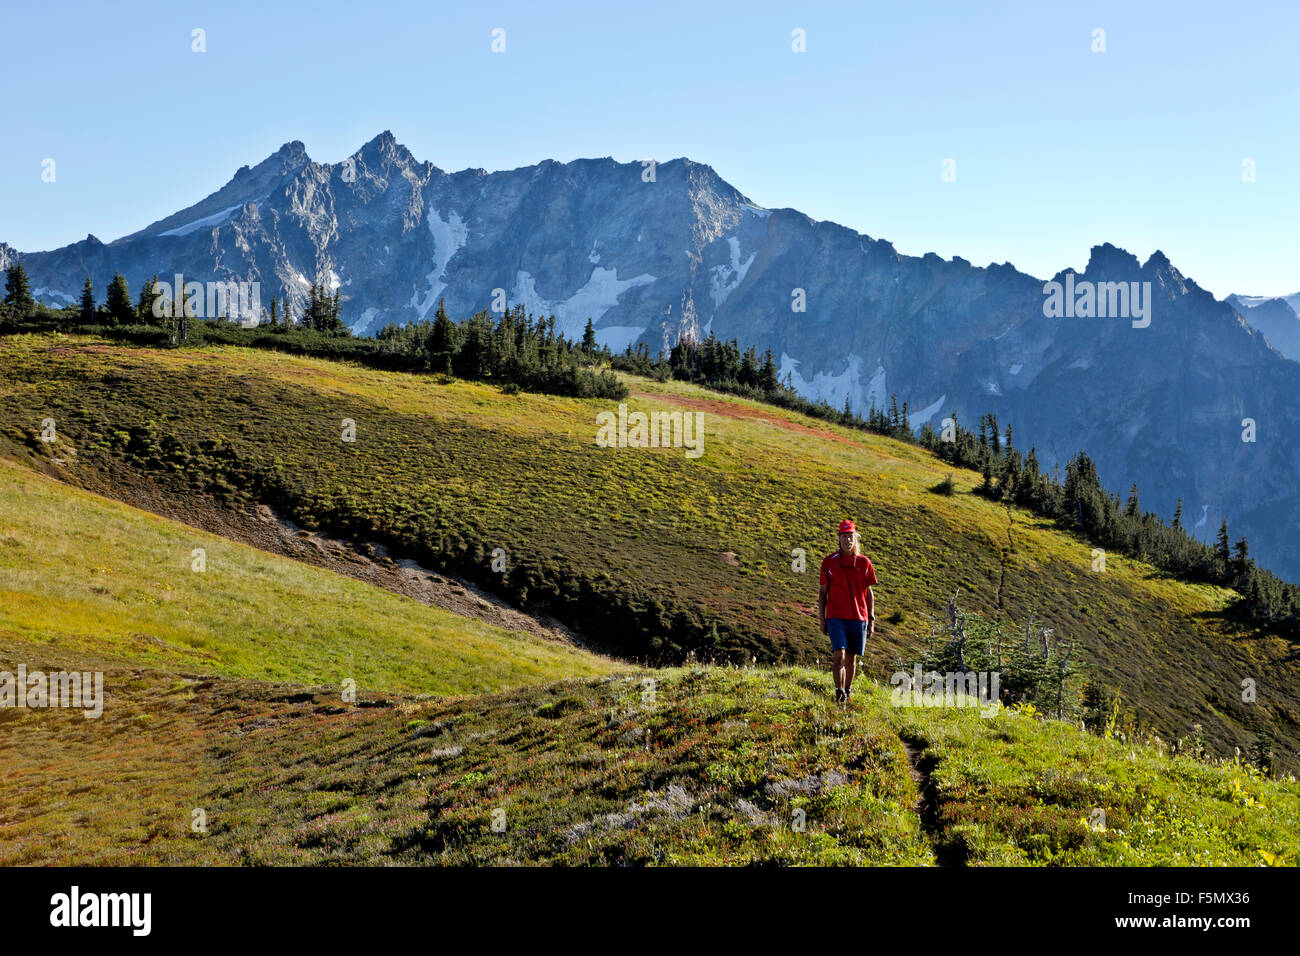 WASHINGTON - Hiker on trail across crest of Liberty Cap with Cirque  Mountain in the distance in the Glacier Peak Wilderness Stock Photo - Alamy